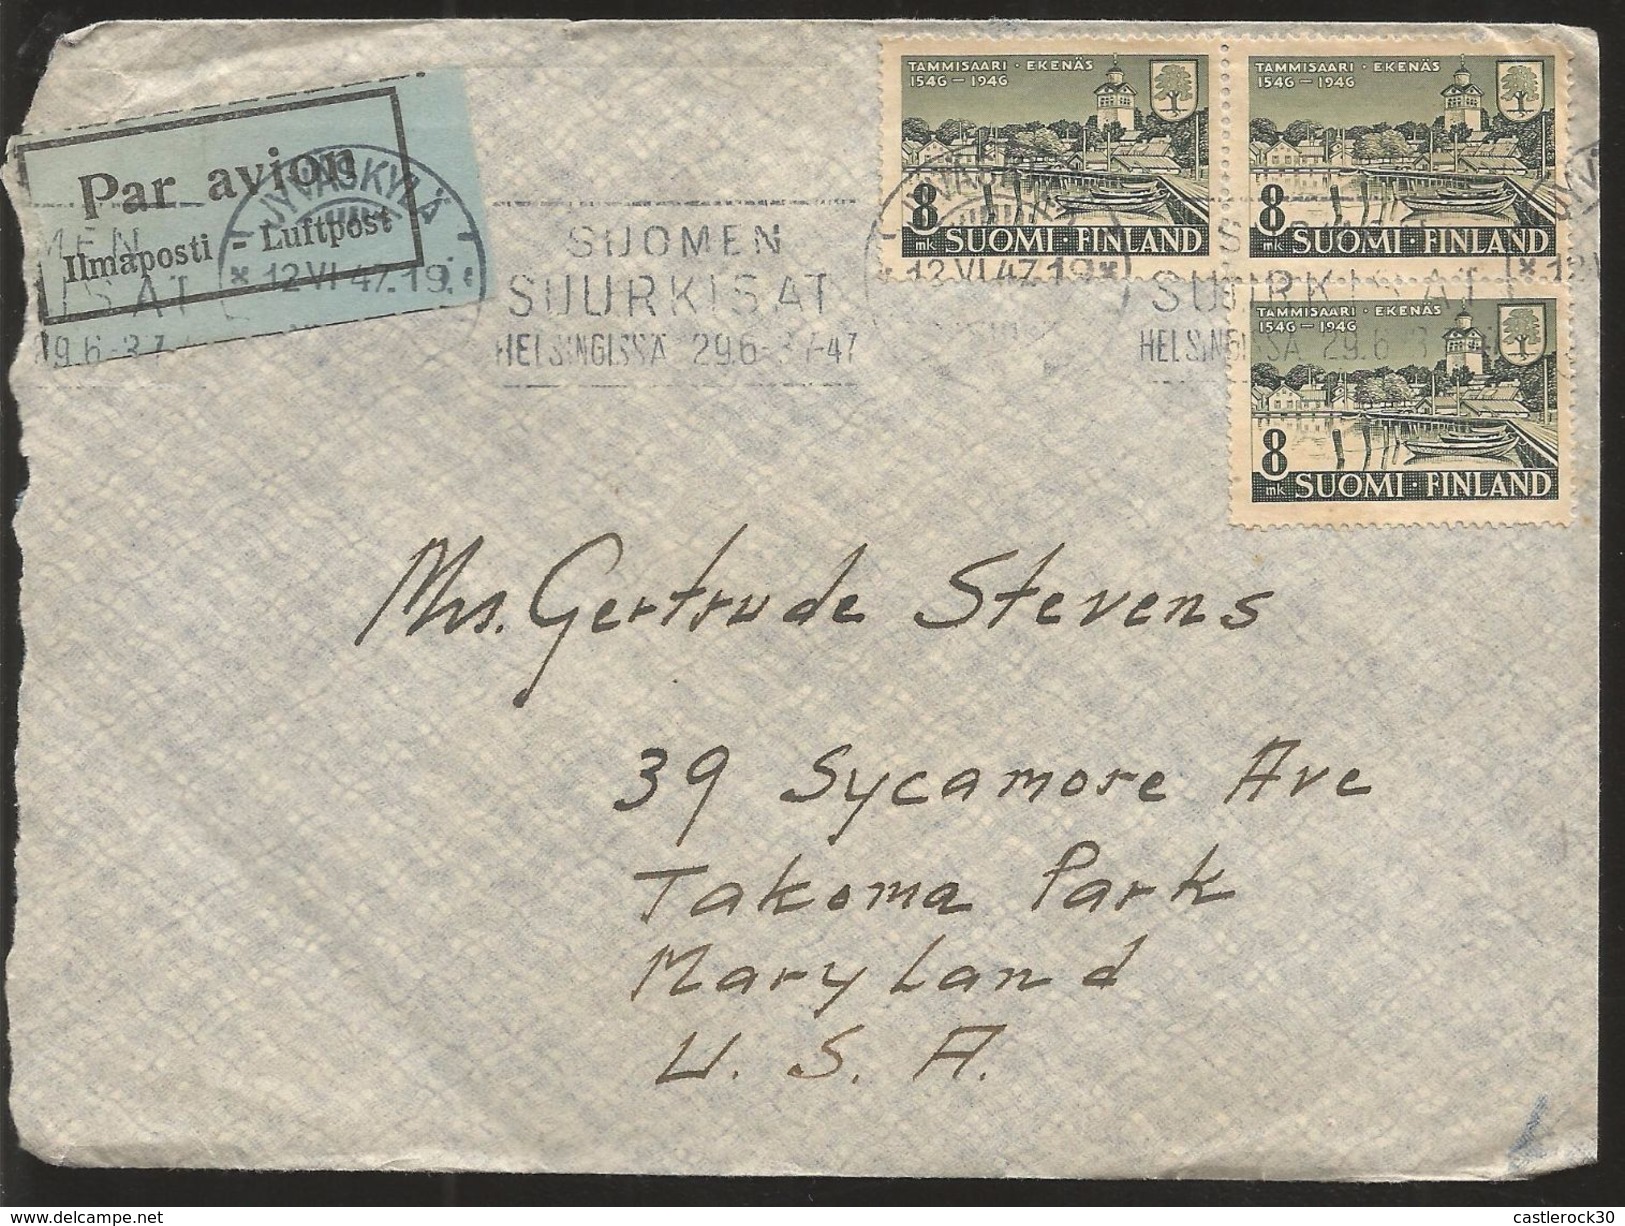 A) 1947 FINLAND, TOWN OF TAMISAARI, SEA, ARCHITECTURE, BOAT, CIRCULATED COVER FROM FINLAND TO USA. - Used Stamps